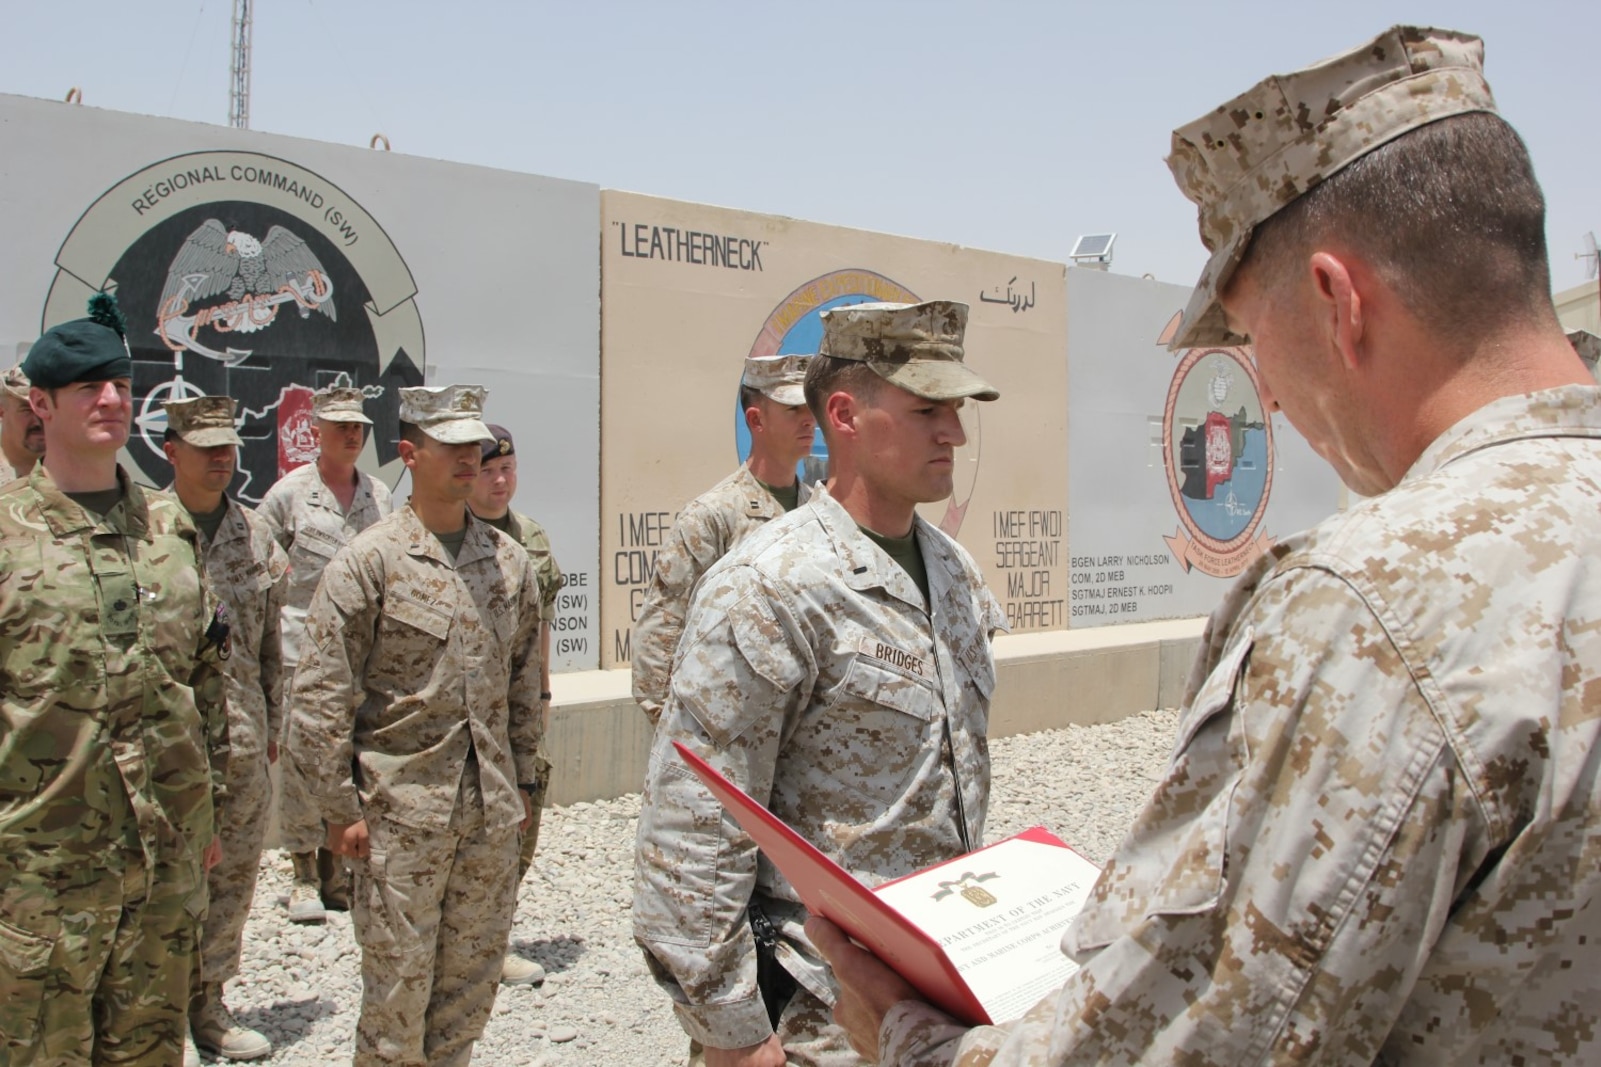 U.S. Marine 1st Lt. Joshua Bridges, a native of Morganton, N.C., and assessments and plans officer, Regional Command (Southwest), stands at attention while Maj. Bob McCarthy, reads an award citation during a ceremony aboard Camp Leatherneck, Helmand province, Afghanistan, July 13, 2014. Bridges deployed to Helmand province during Jan. 2014 and was vital to RC(SW) planning efforts during the 2014 Afghan presidential elections and the upcoming transition of full security responsibility to the Afghan National Security Forces in the region by the end of 2014.